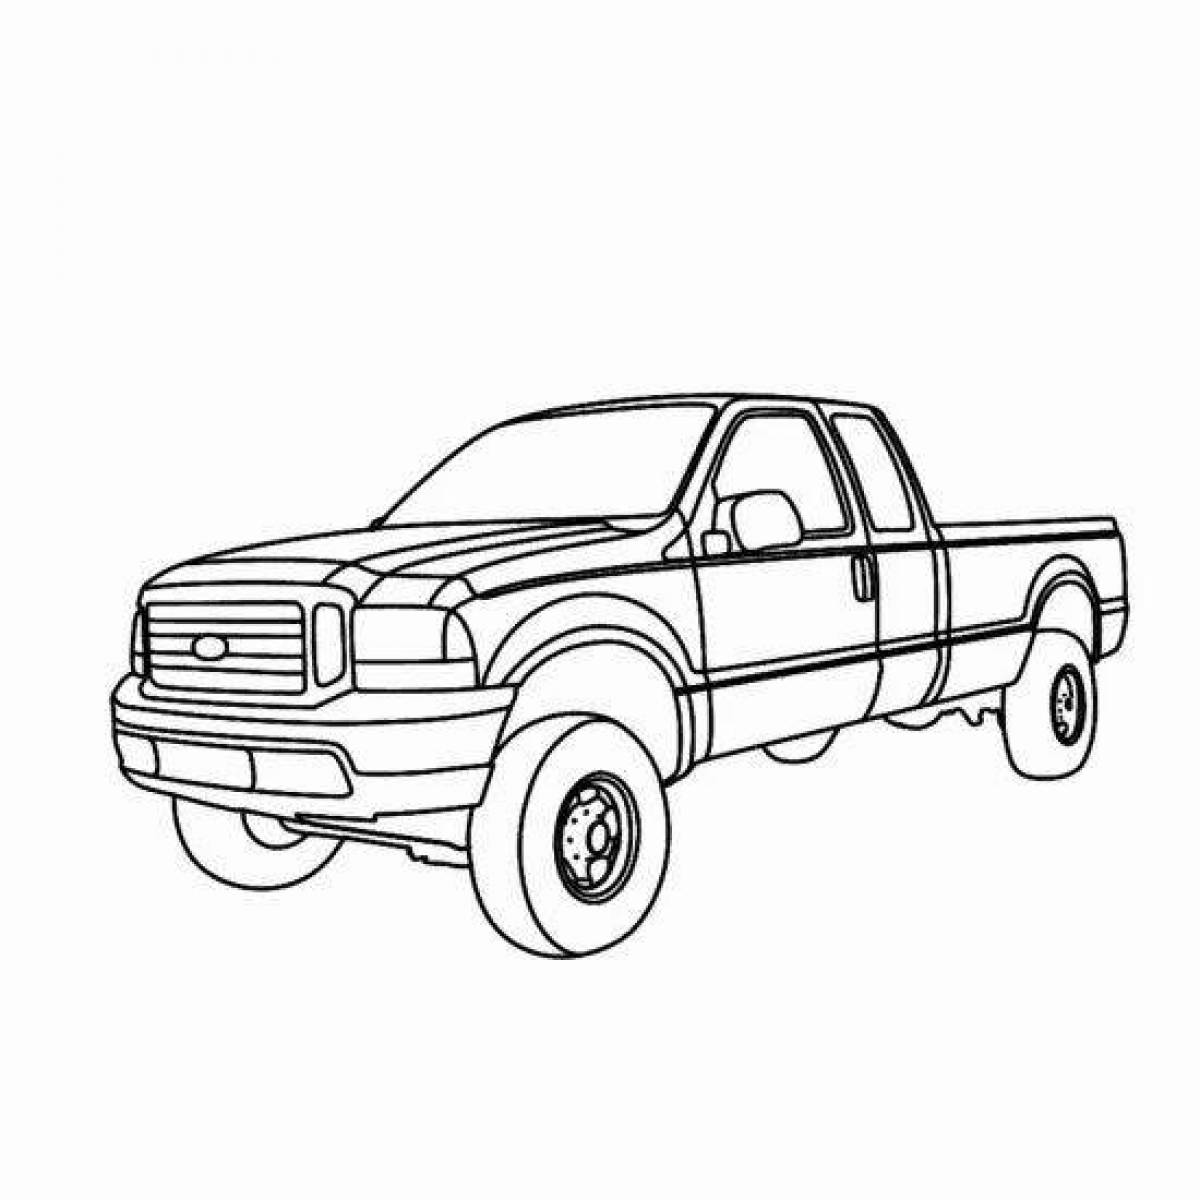 Glowing pickup truck coloring page